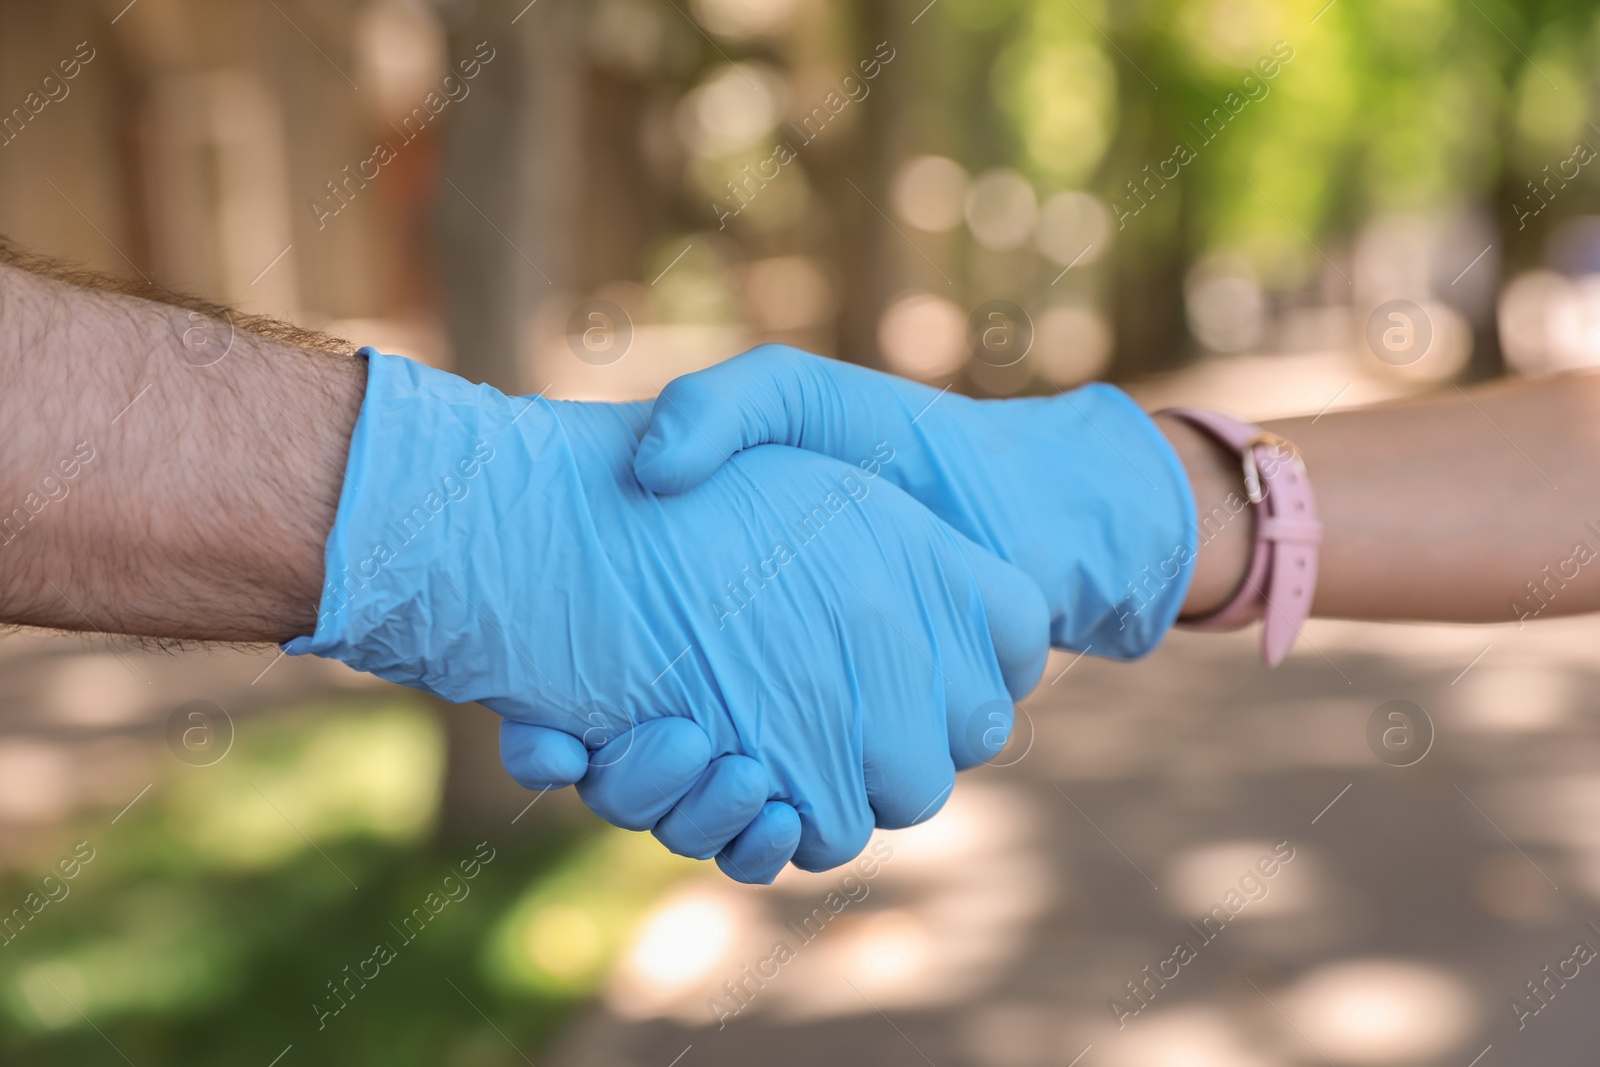 Photo of Man and woman in protective gloves shaking hands to say hello outdoors, closeup